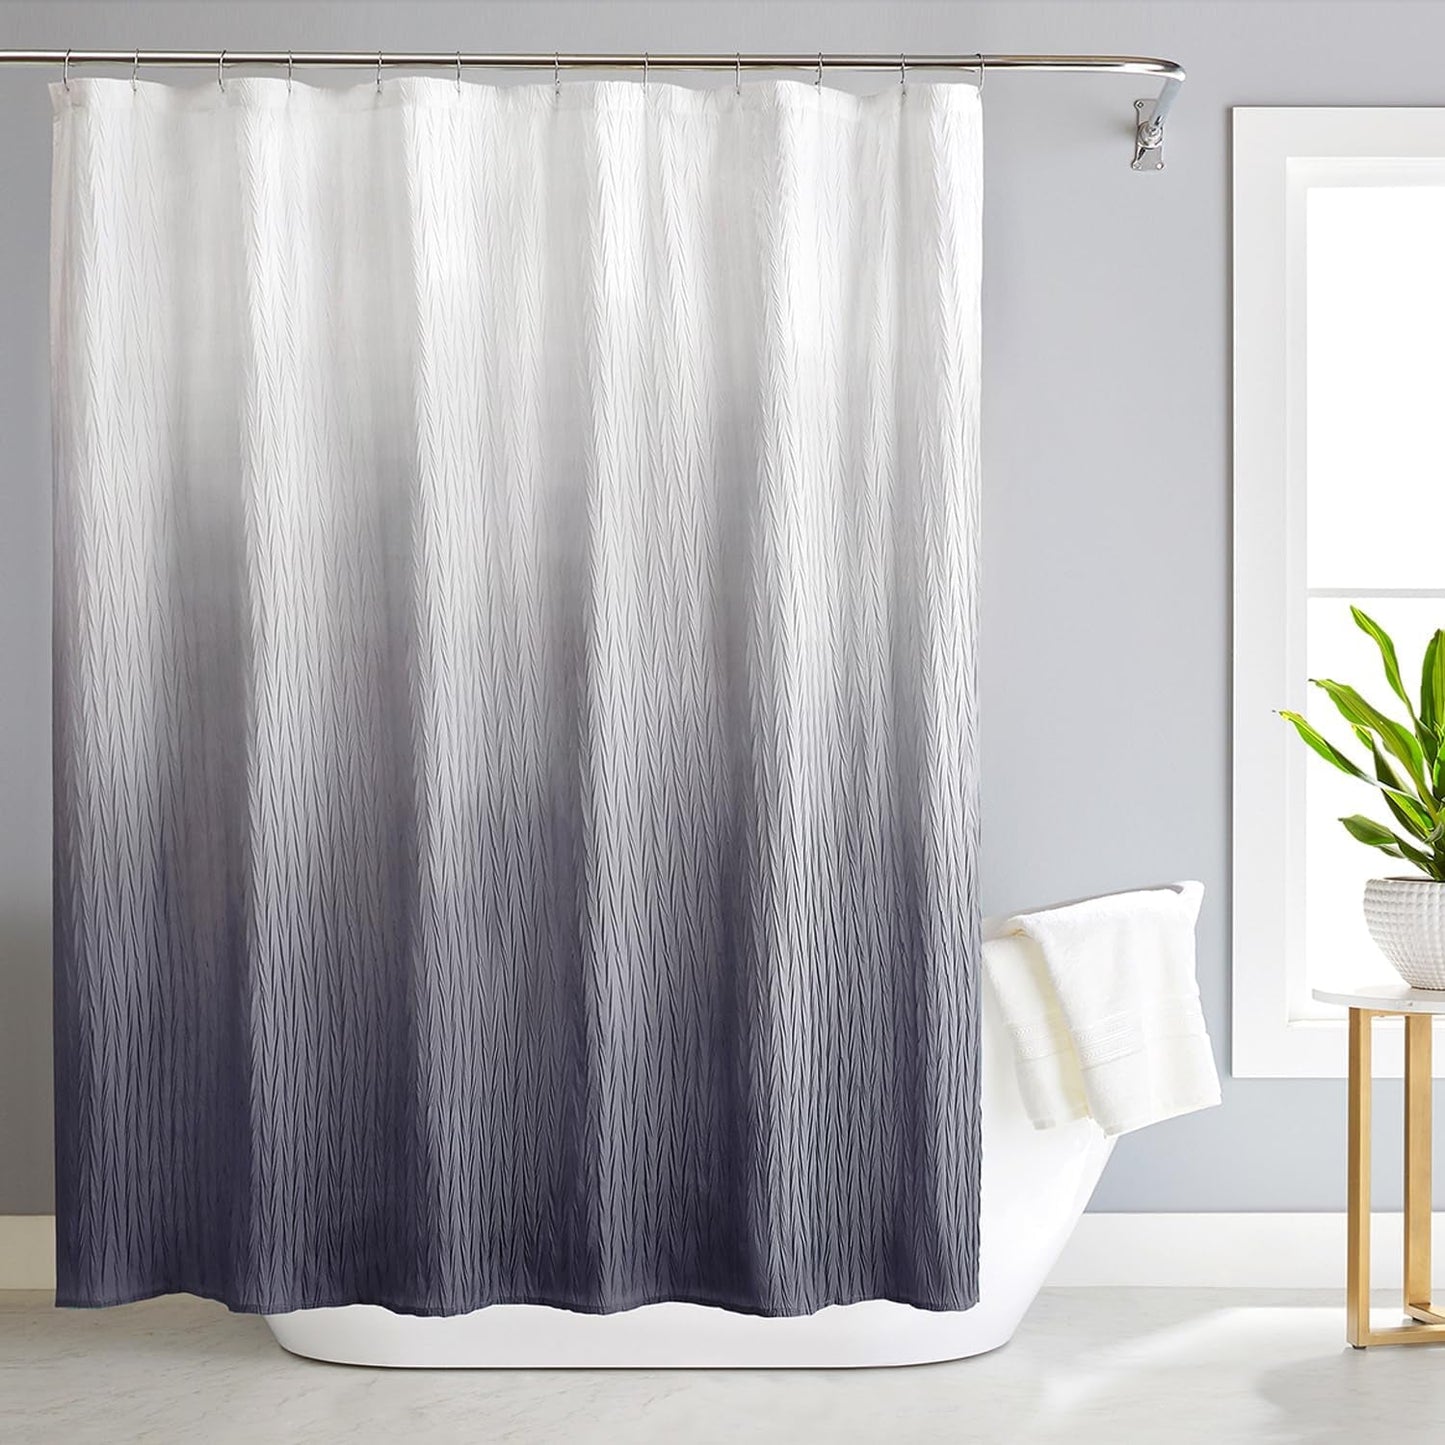 Ombre Shower Curtain Set with Rugs and Hooks for Bathroom Textured Waterproof Gradient Fabric Bath Shower Curtain 72 X 72 Inches Blue